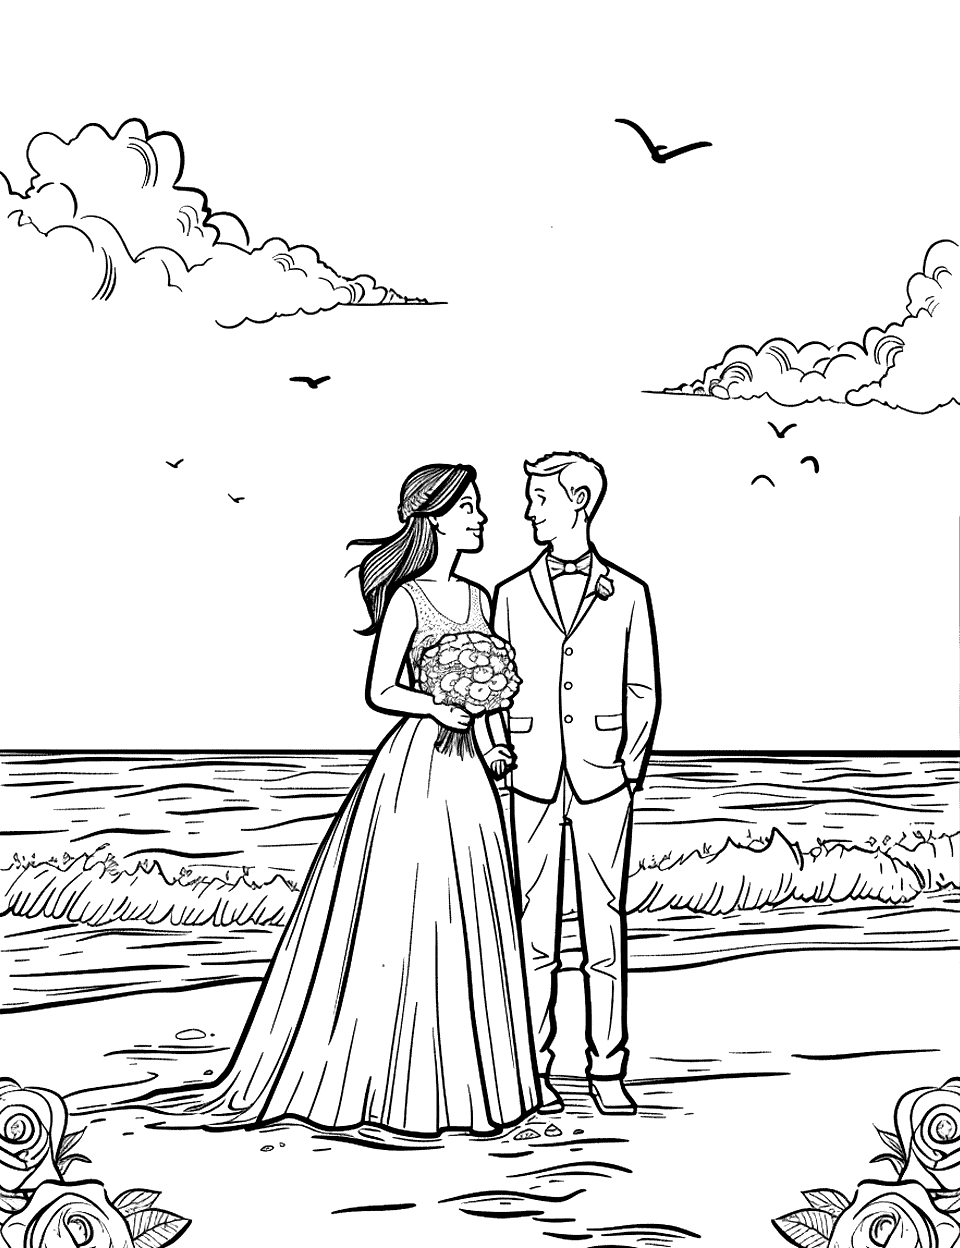 Beach Wedding Ceremony Coloring Page - A couple exchanging vows on a sandy beach with the ocean in the background.